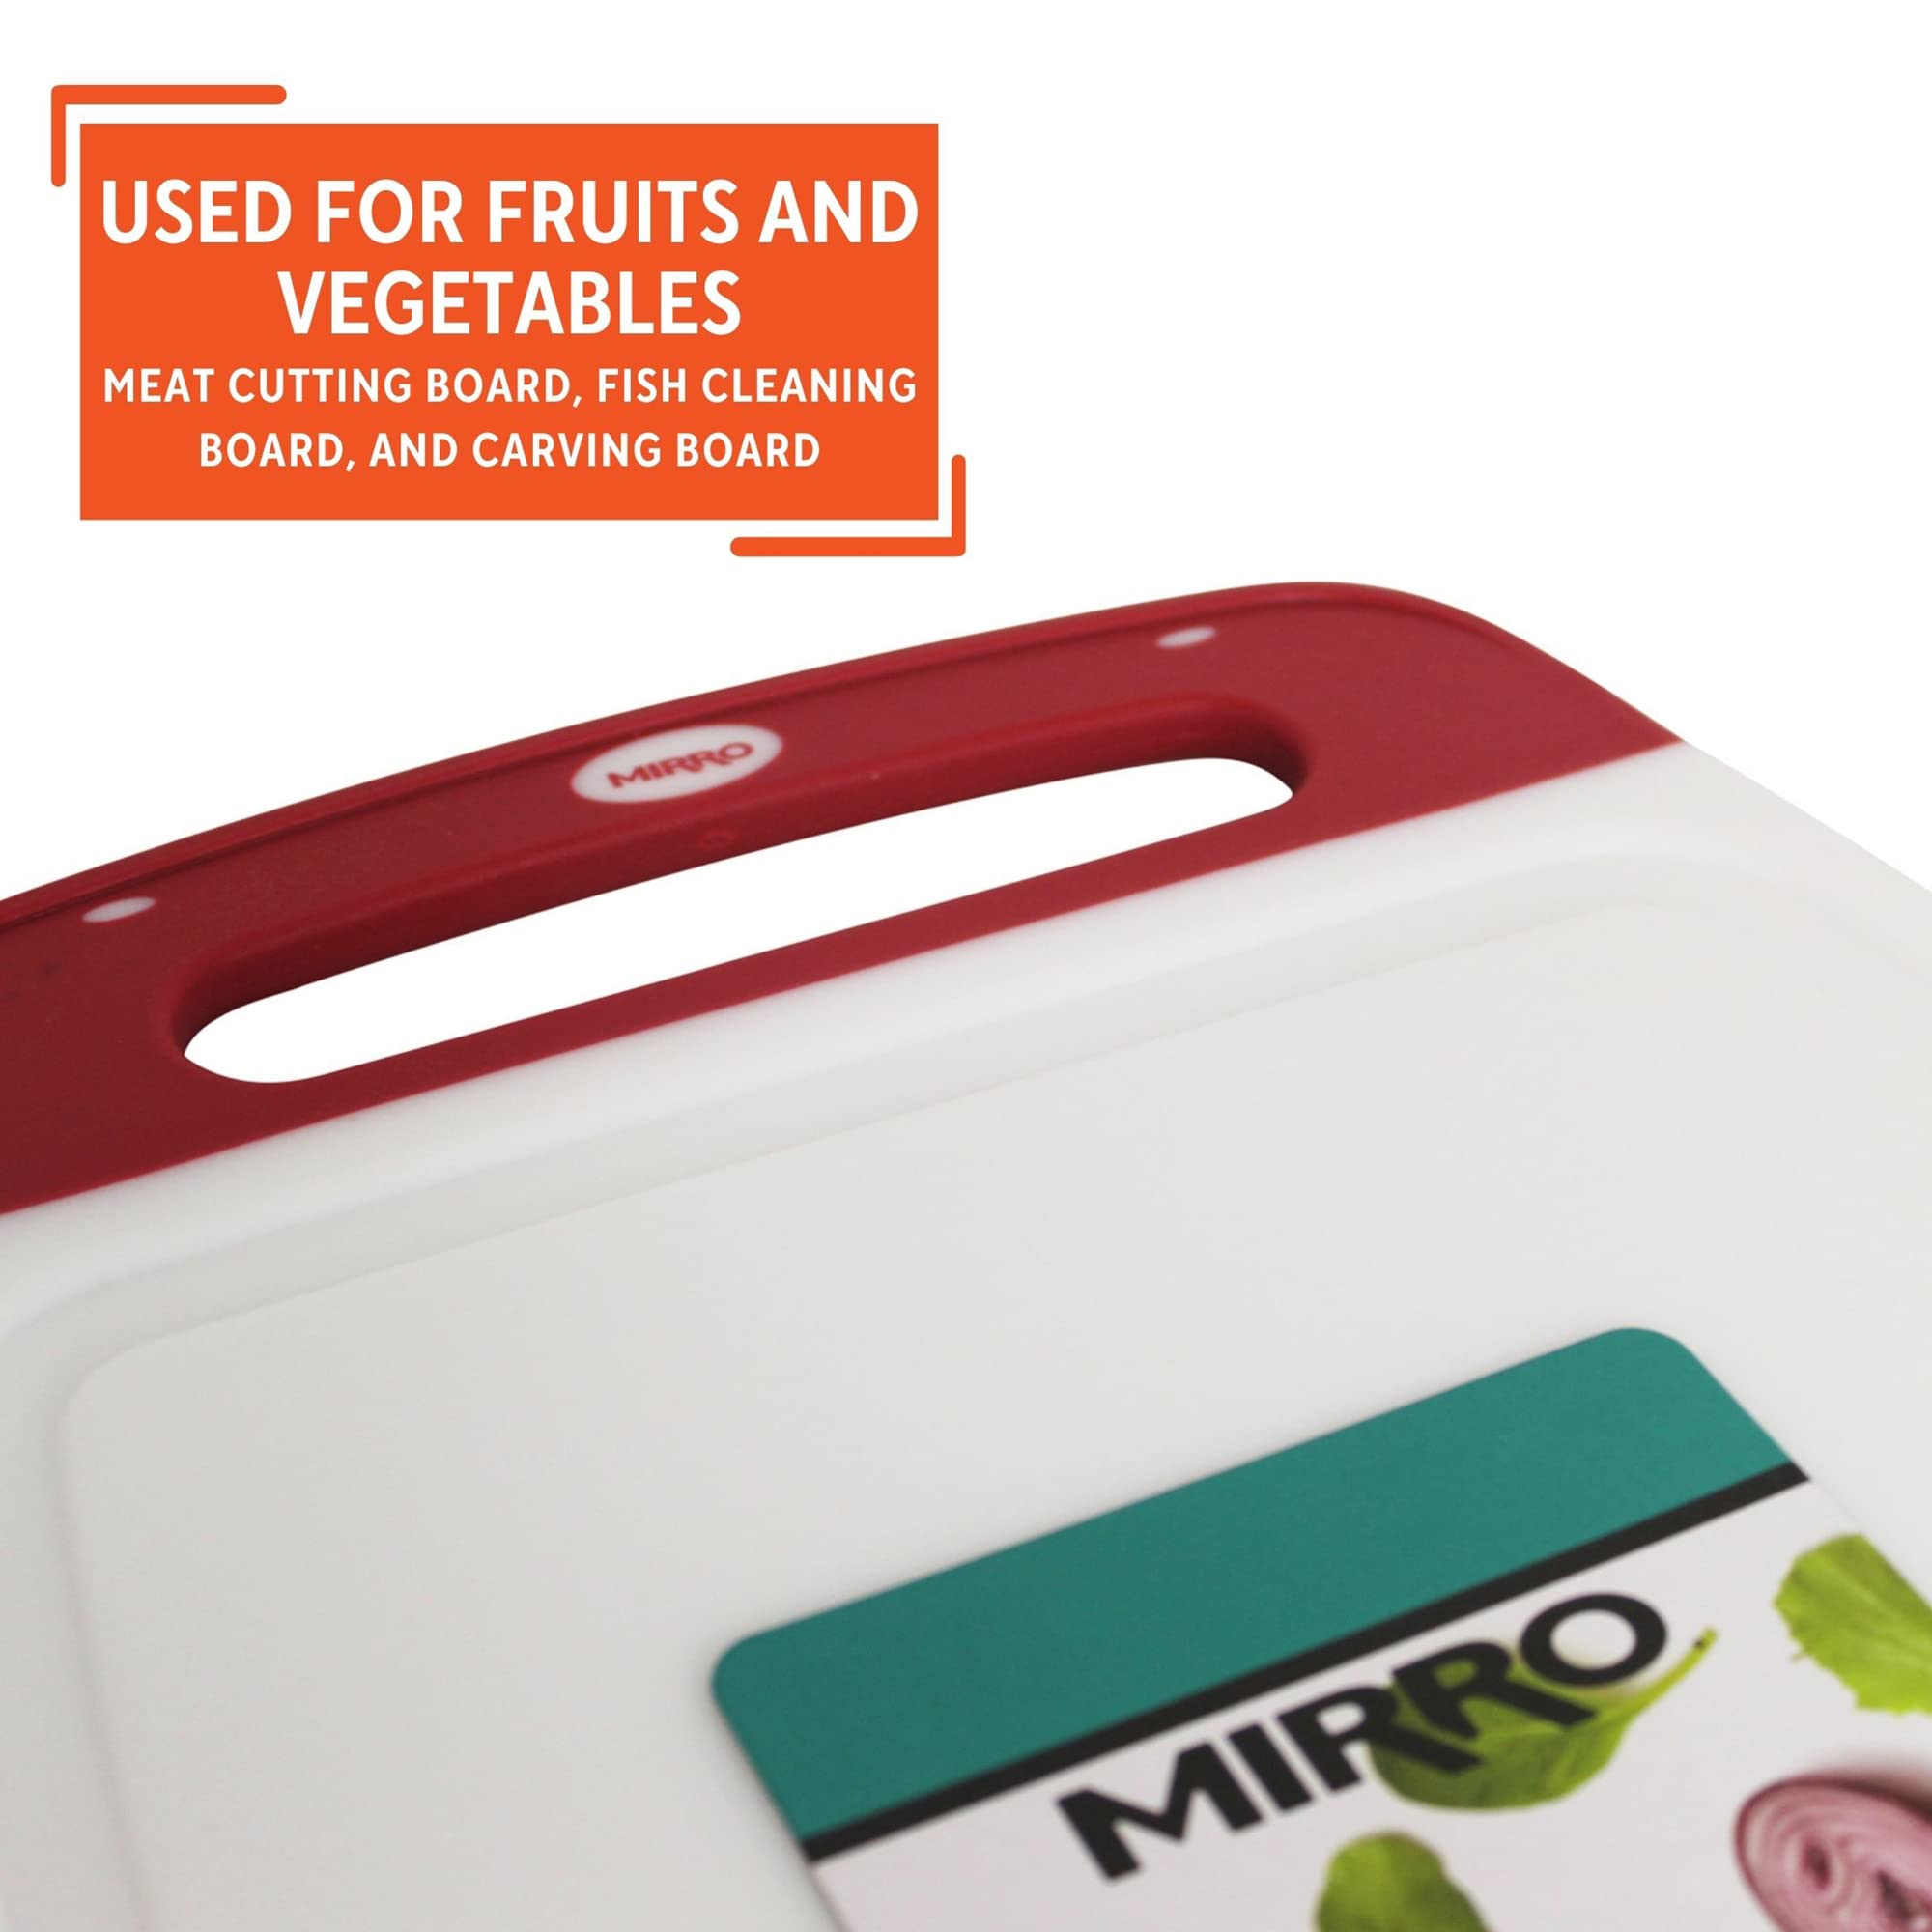 Mirro 16x10" Plastic Cutting Board with Silicone Covering, White/Red